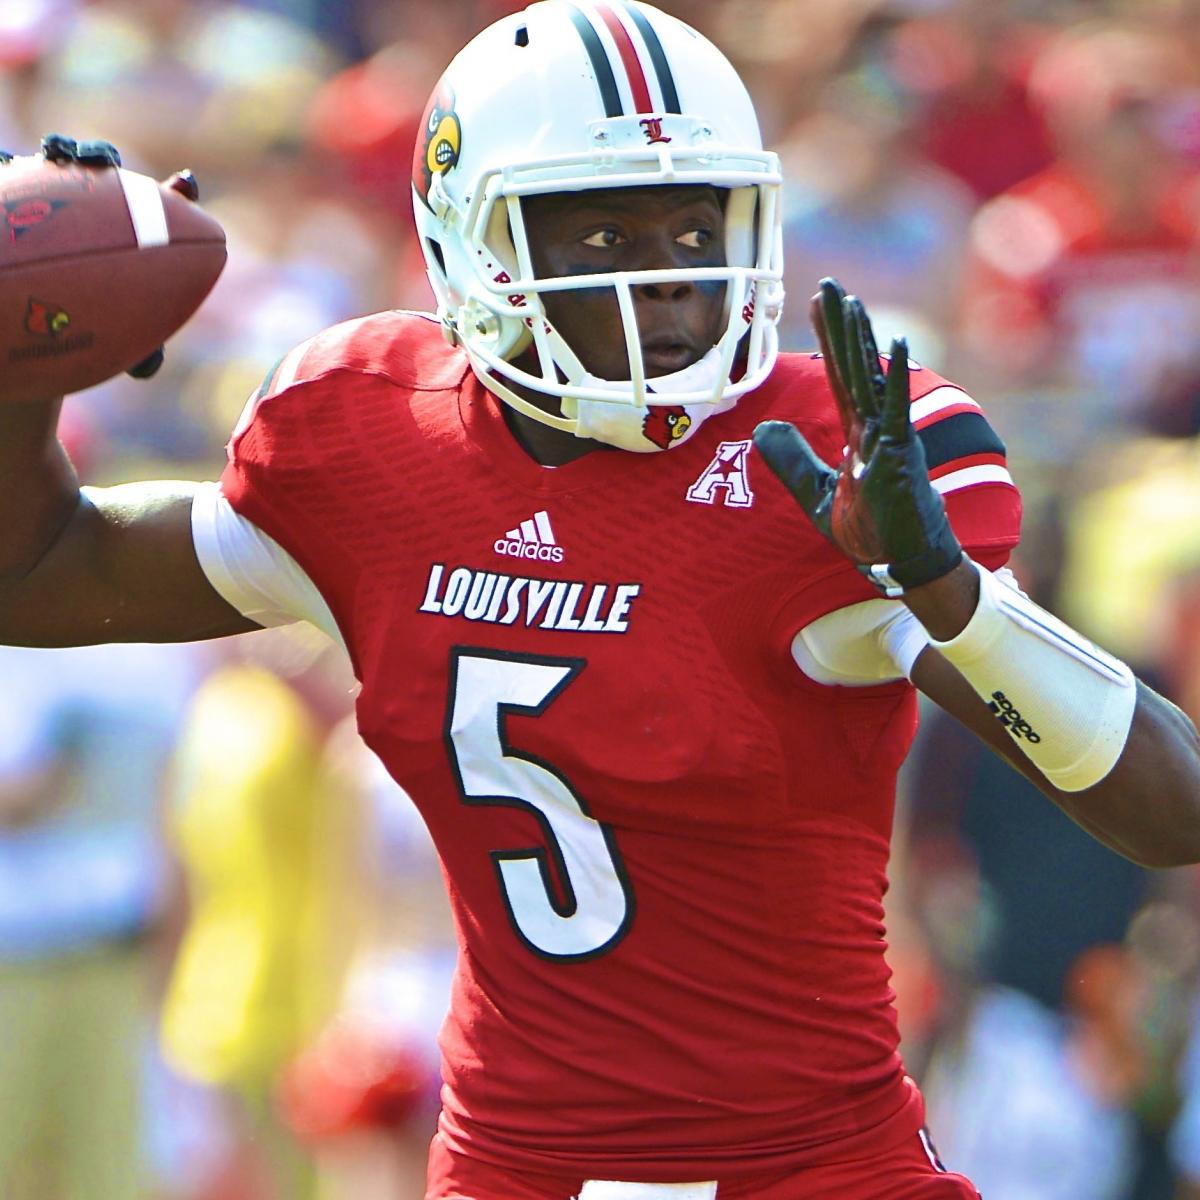 UCF vs. Louisville: Live Score and Highlights | Bleacher Report | Latest News, Videos and Highlights